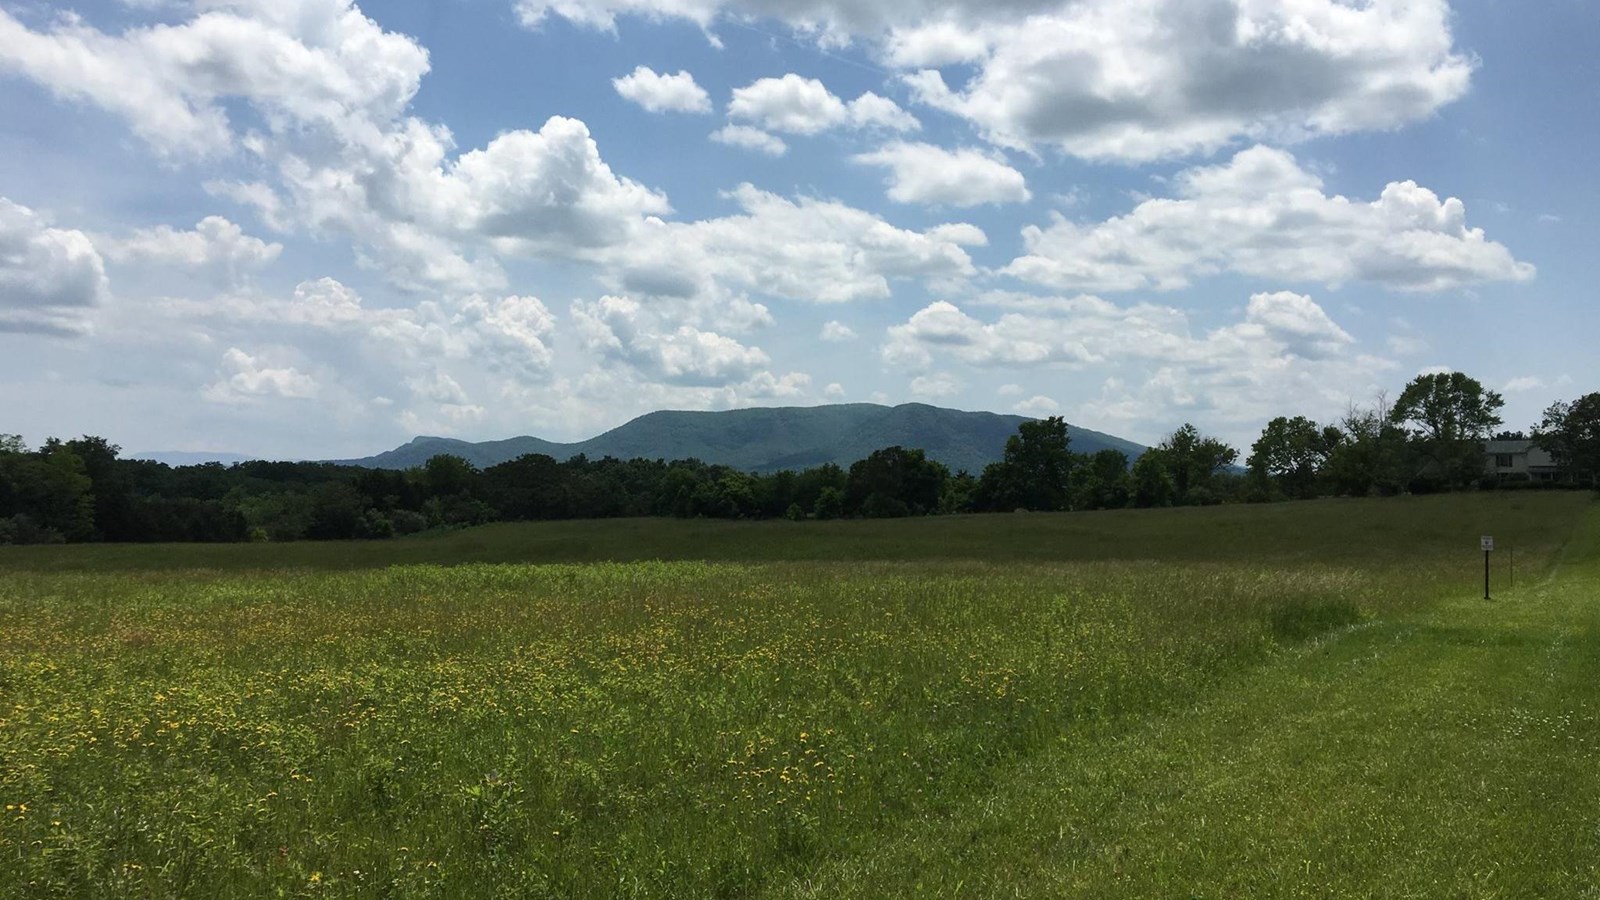 A mountain looms behind a grass field with mowed trails and a belt of trees.